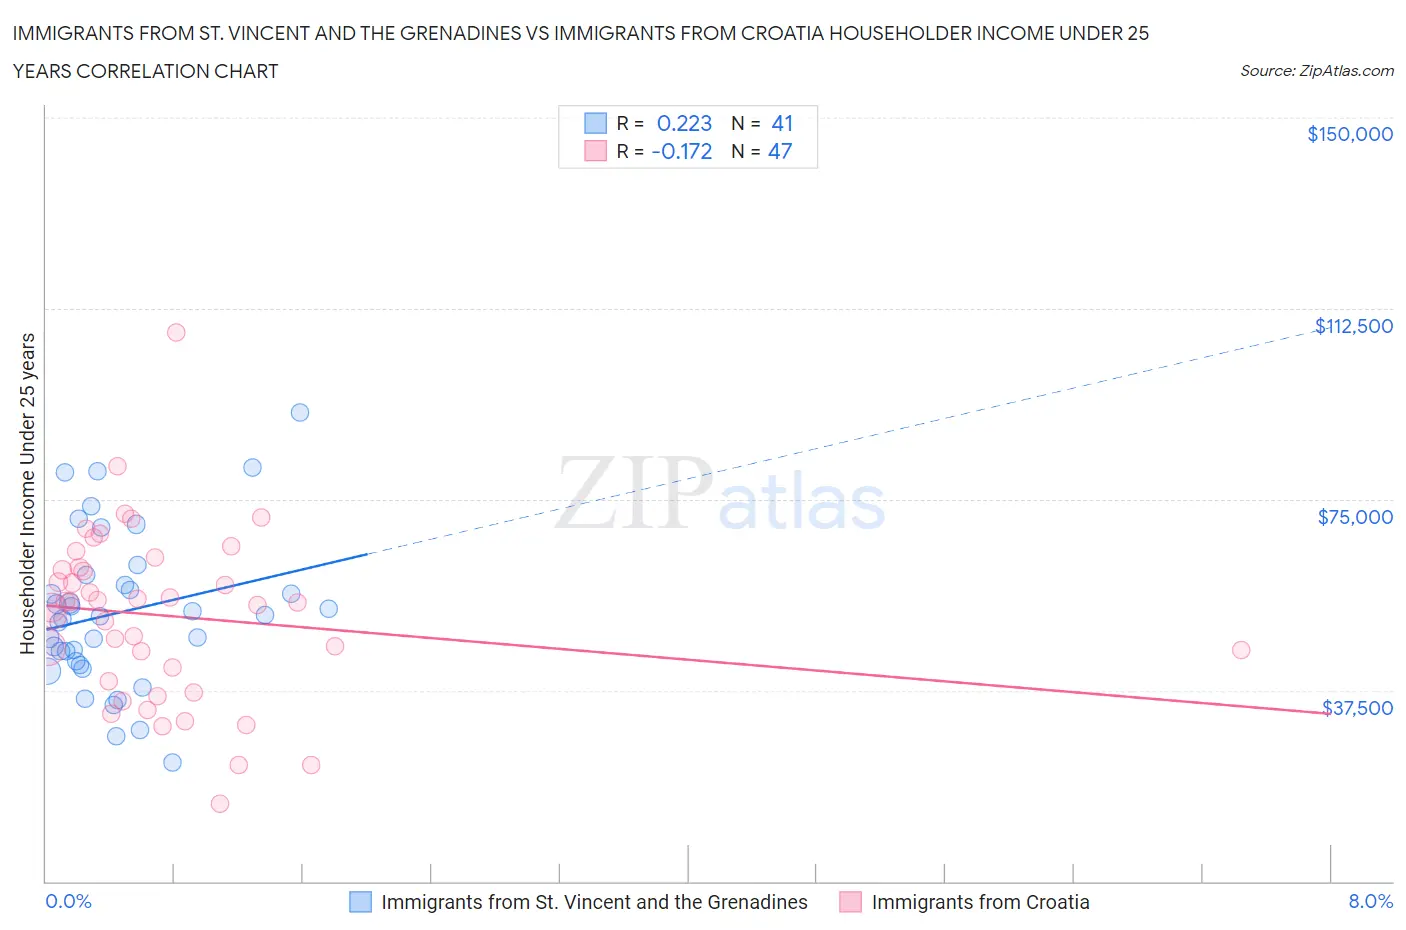 Immigrants from St. Vincent and the Grenadines vs Immigrants from Croatia Householder Income Under 25 years